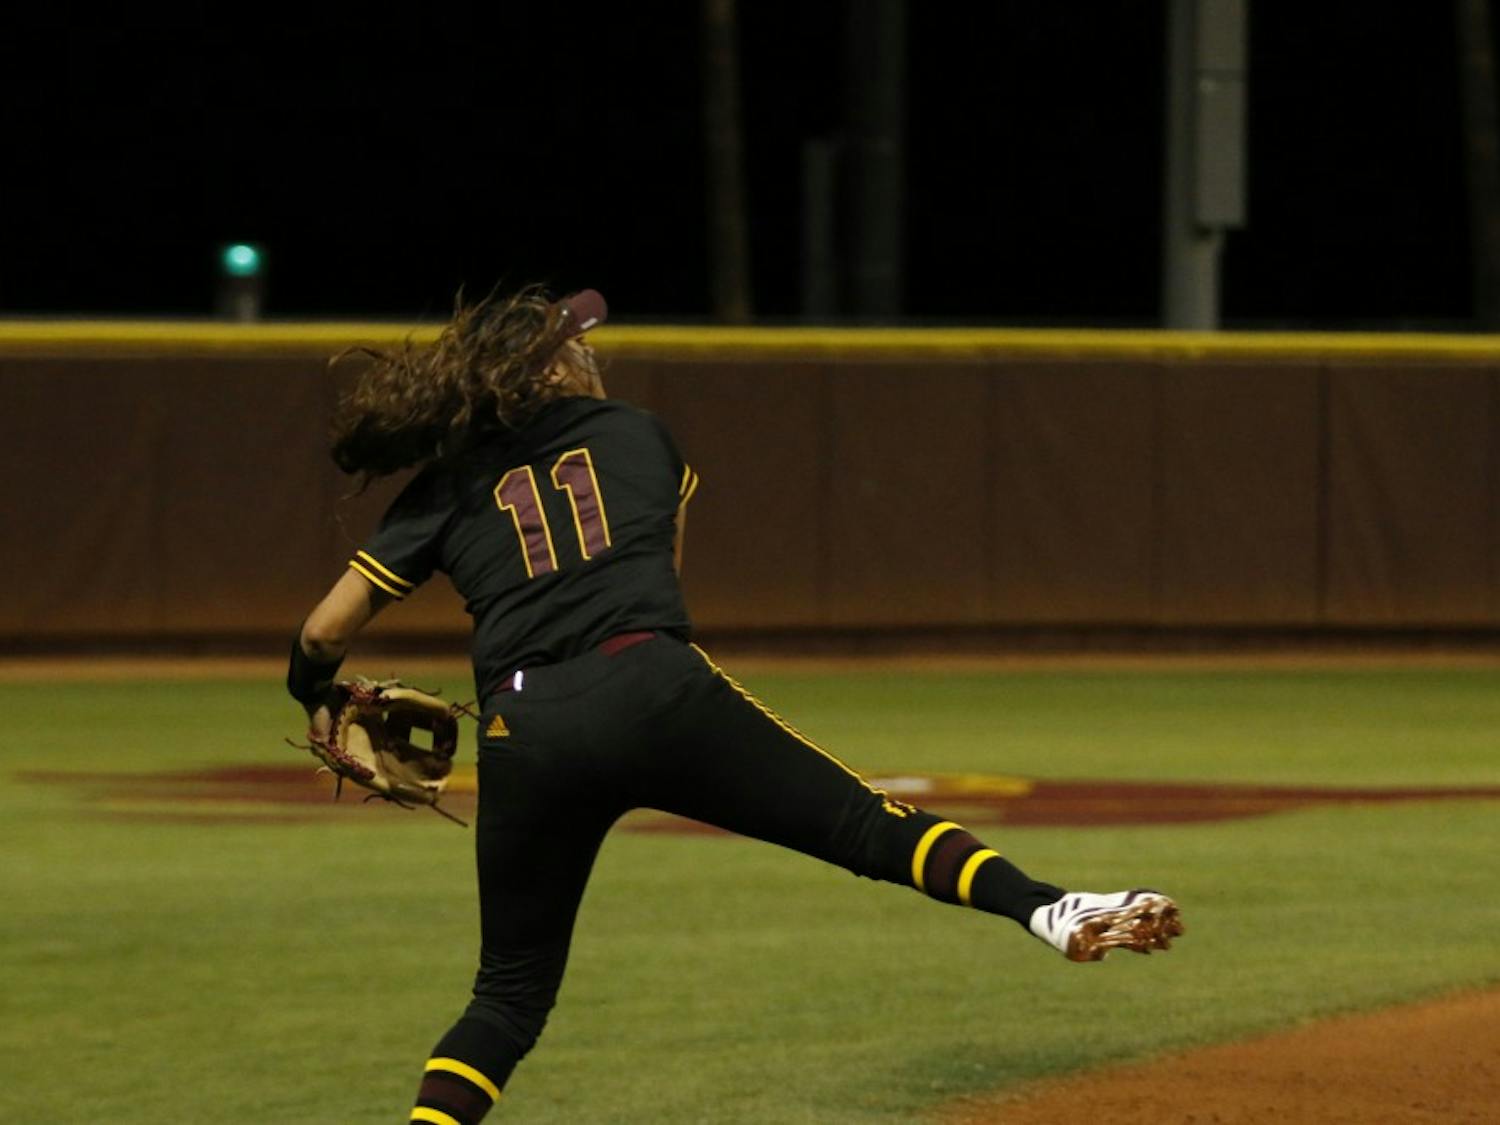 ASU senior short stop Chelsea Gonzales (11) catches the ball and throws it to first base in a softball game versus Oregon State University at Alberta B. Farrington Stadium in Tempe, Arizona on Sunday, March 26, 2017. The Sun Devils won the game 11-0.